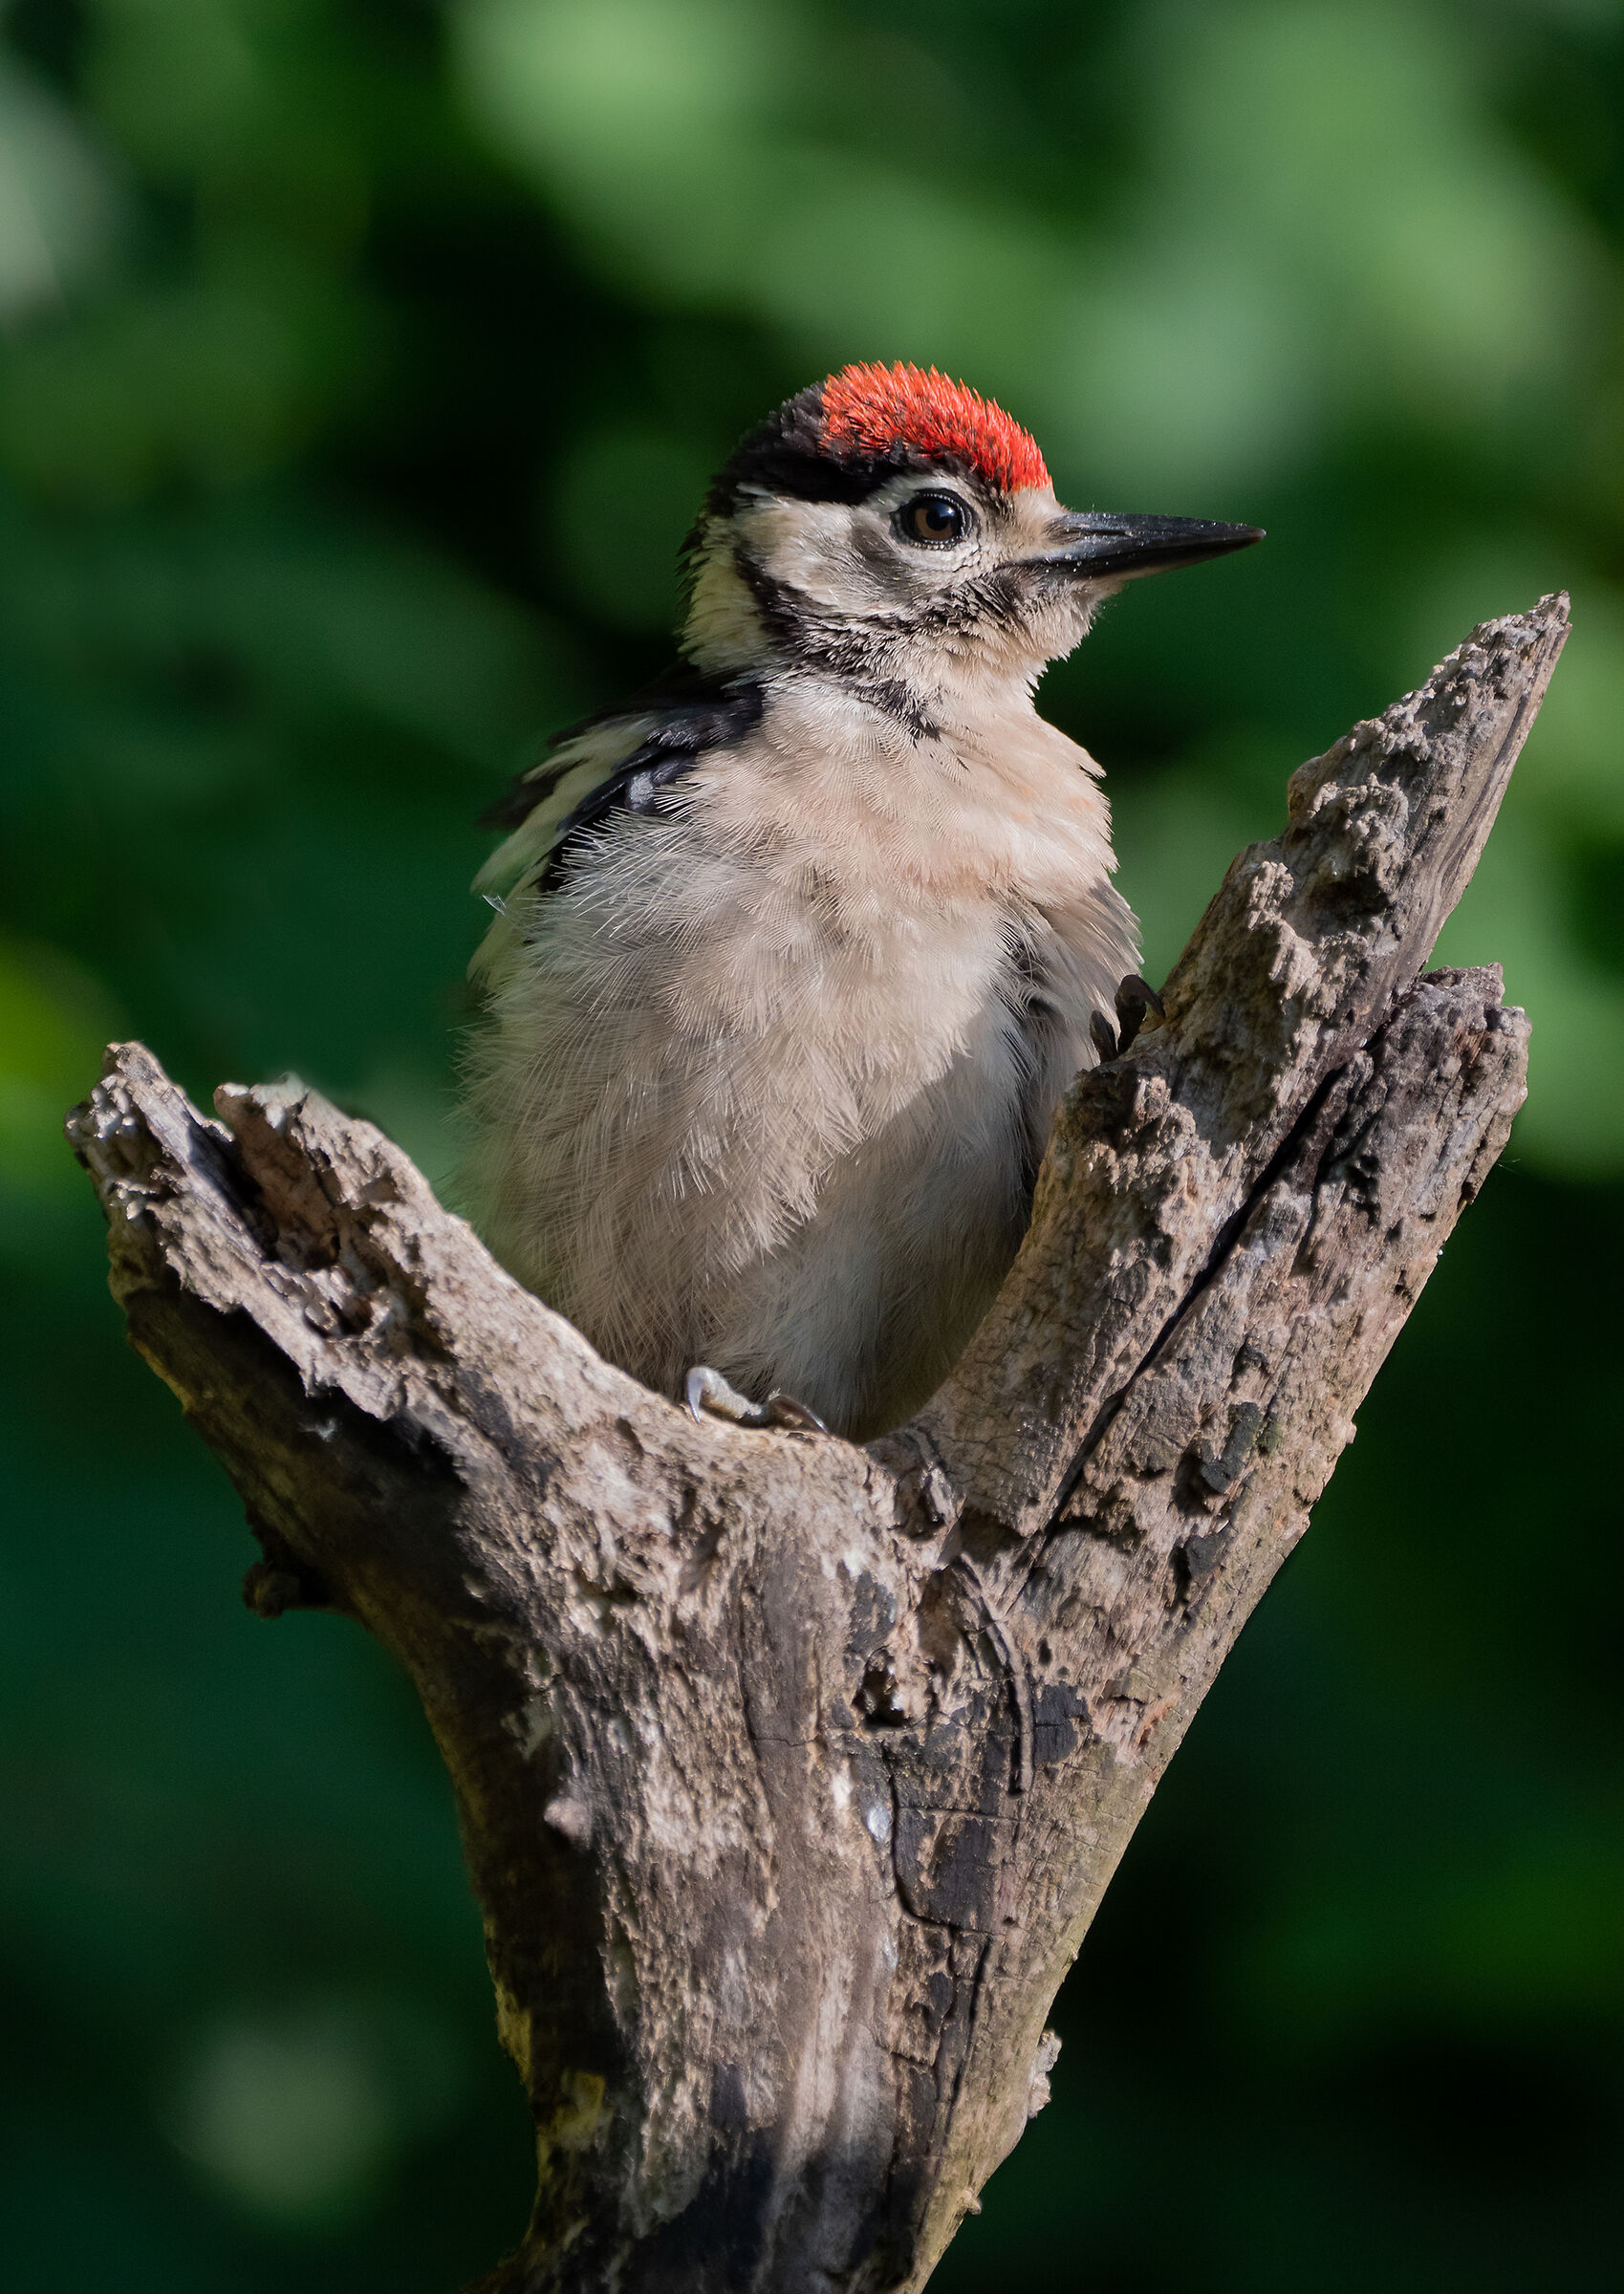 Young woodpeckers grow...